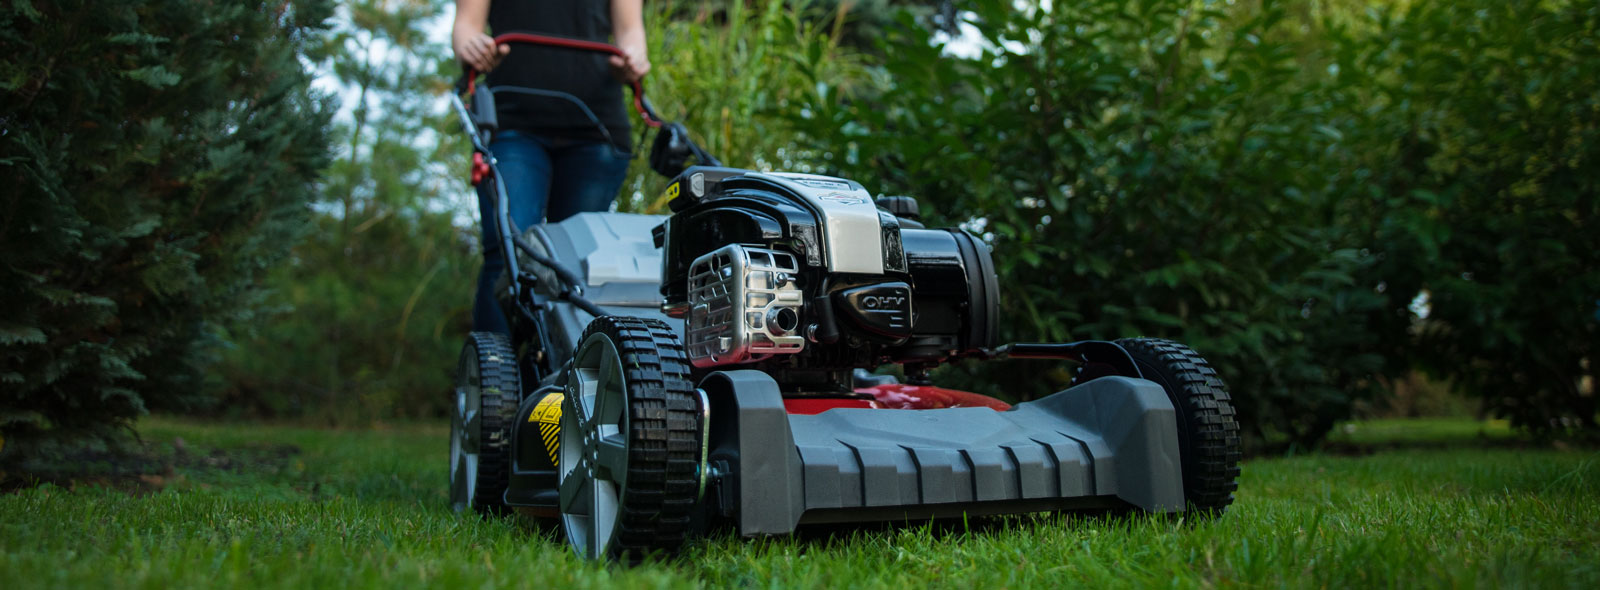 Lawn Mower Buying Guide